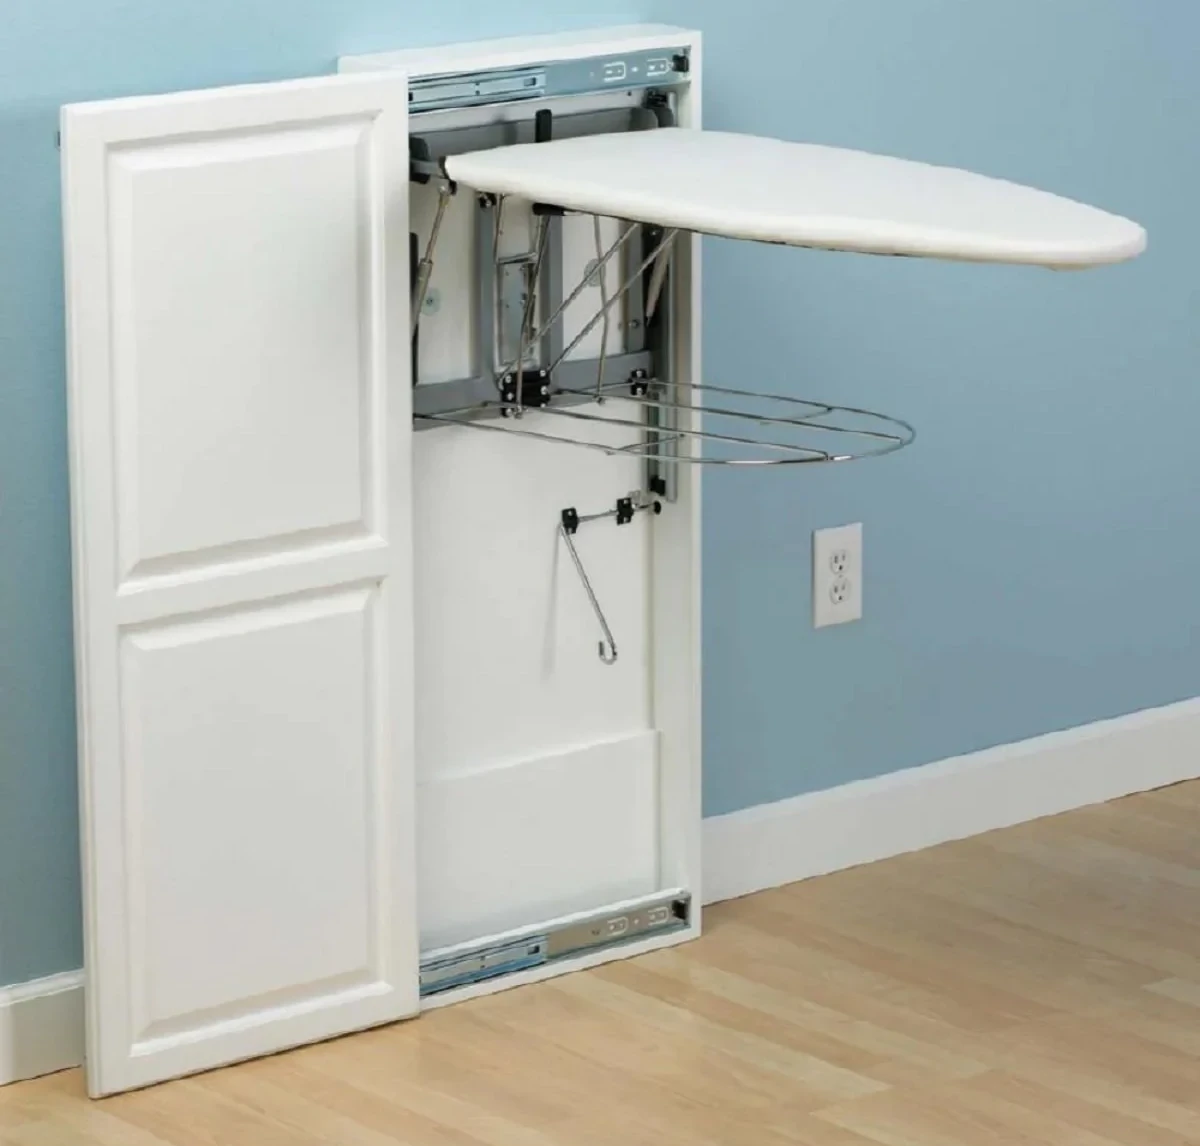 Wall-mounted ironing board: 4 models and useful tips